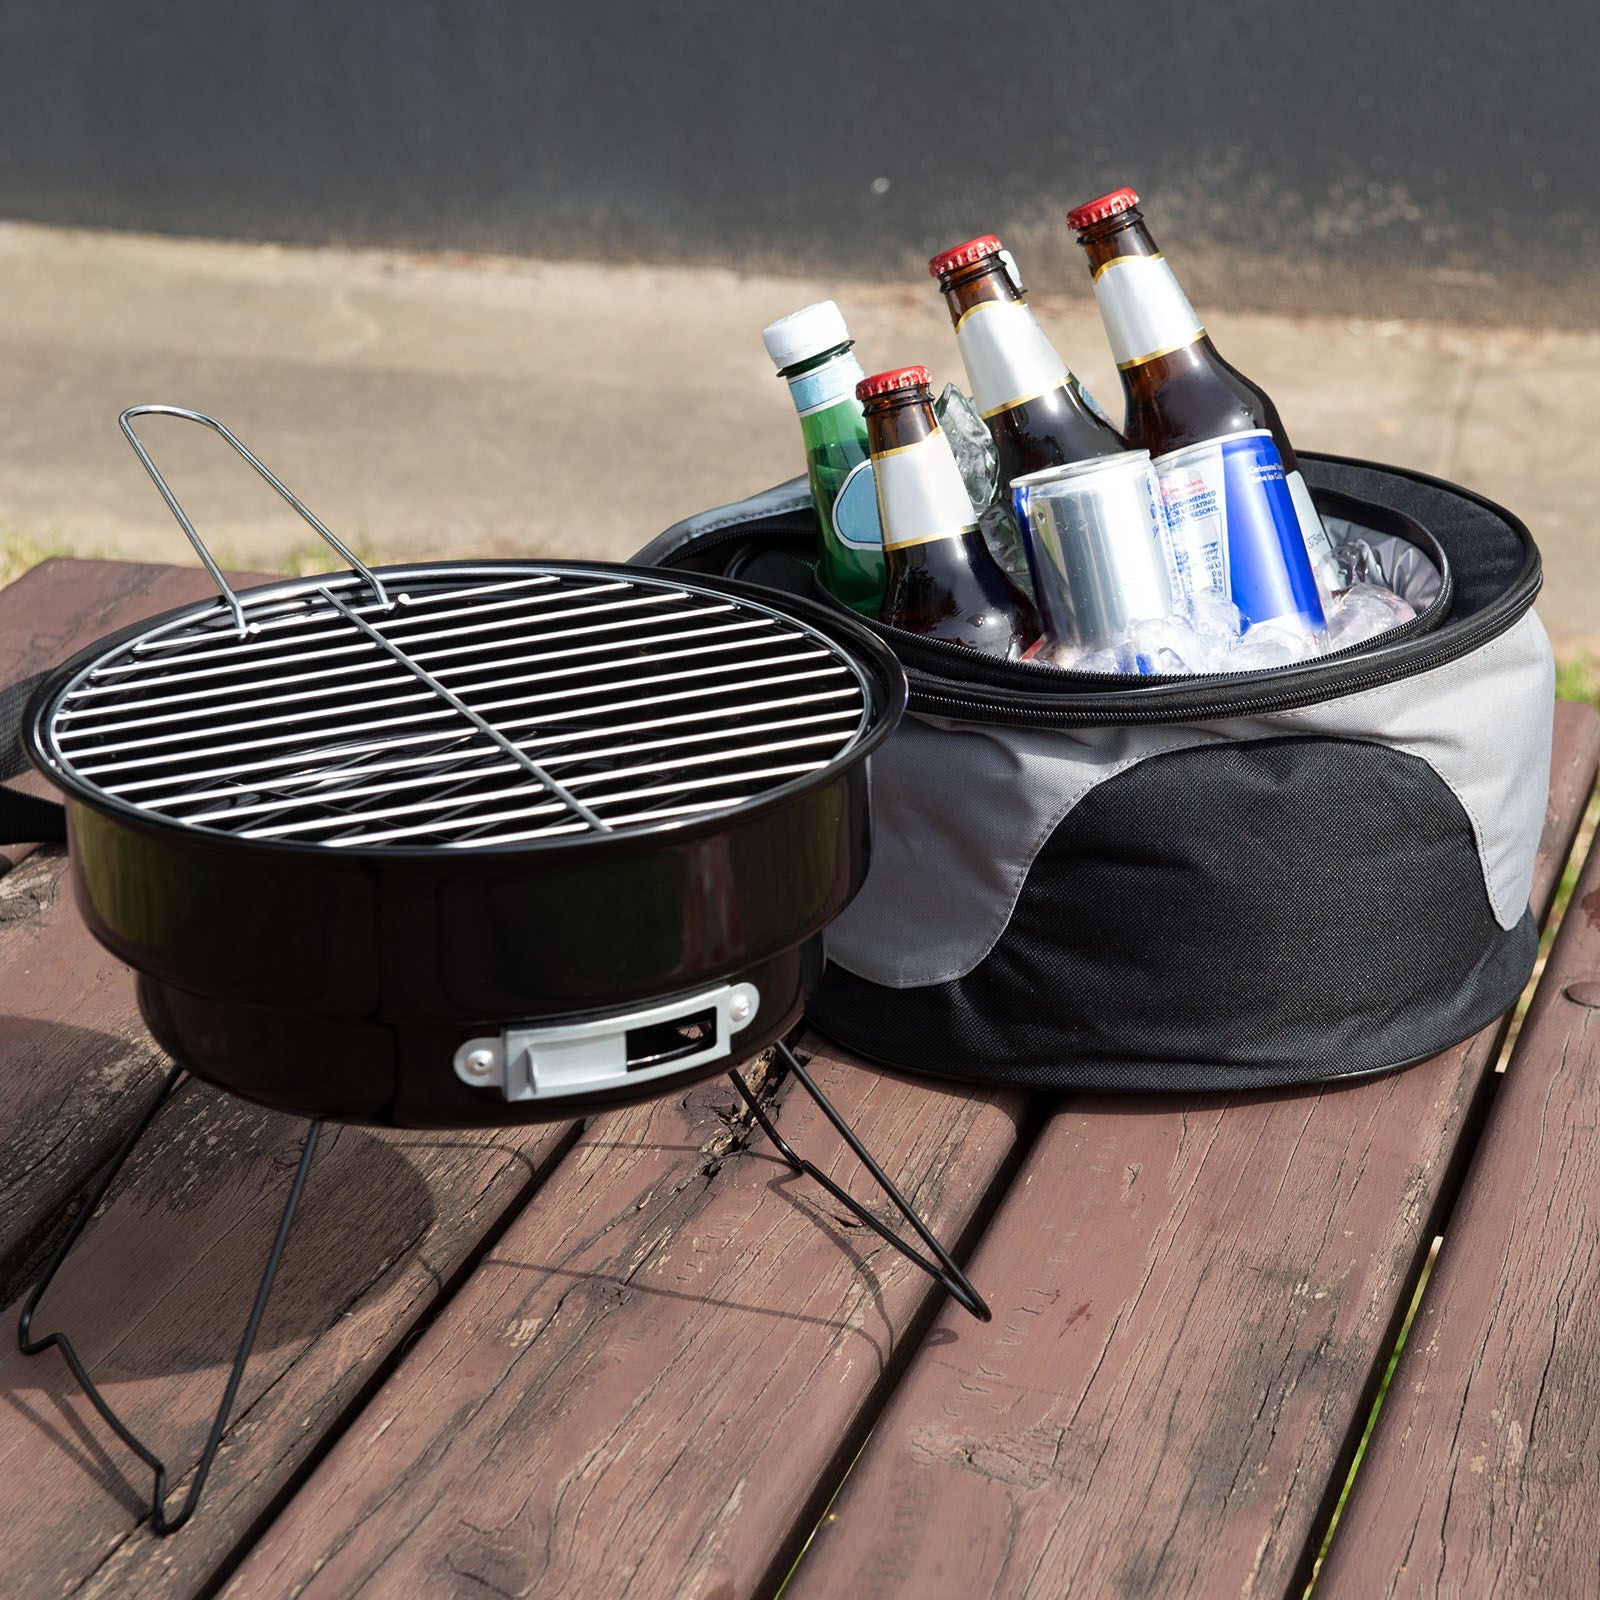 Havana Outdoors 2-IN-1 BBQ Grill Cooler Combo Set Outdoor Camping Picnic